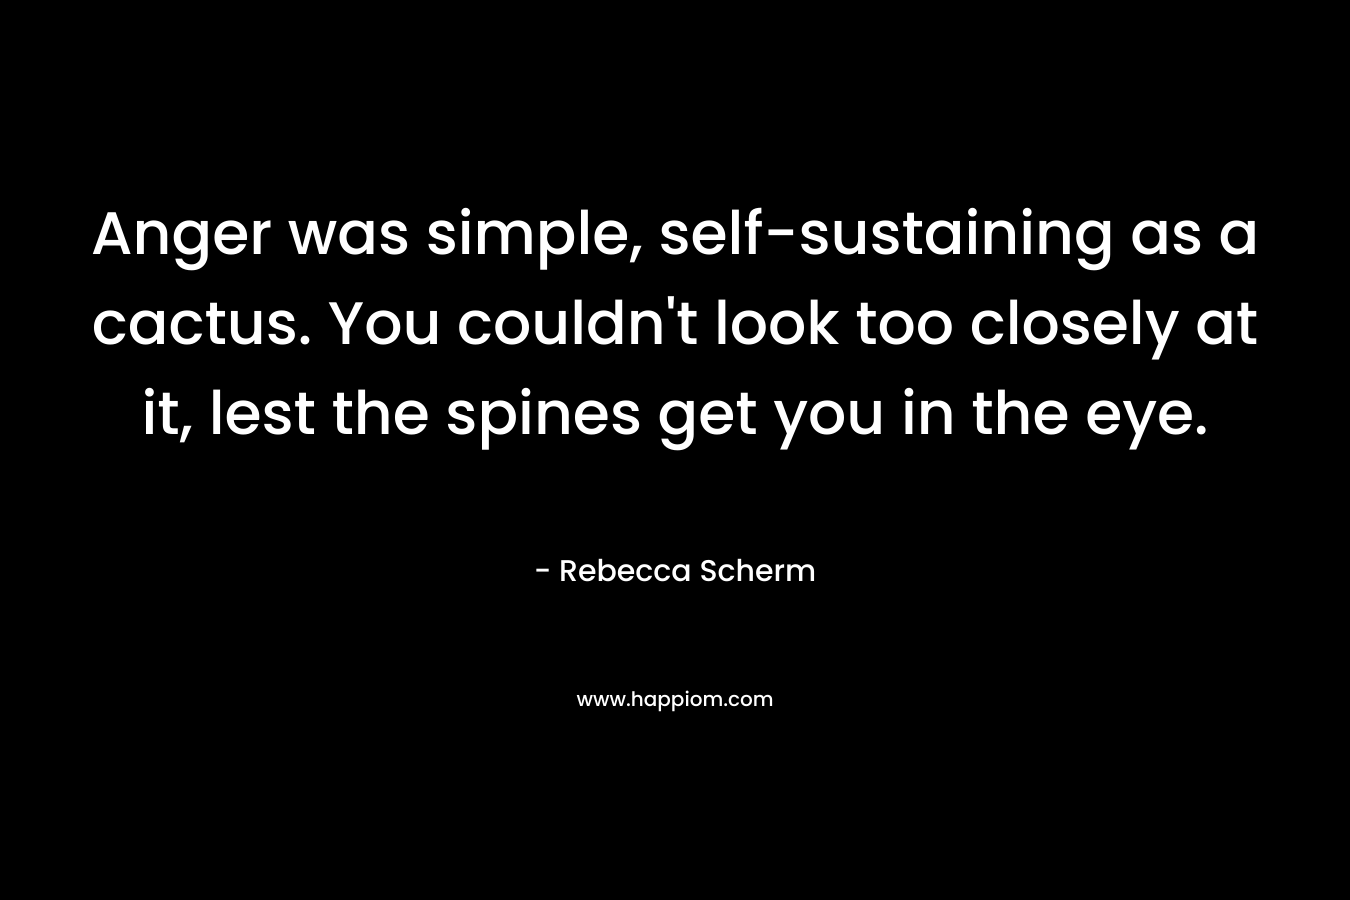 Anger was simple, self-sustaining as a cactus. You couldn’t look too closely at it, lest the spines get you in the eye. – Rebecca Scherm